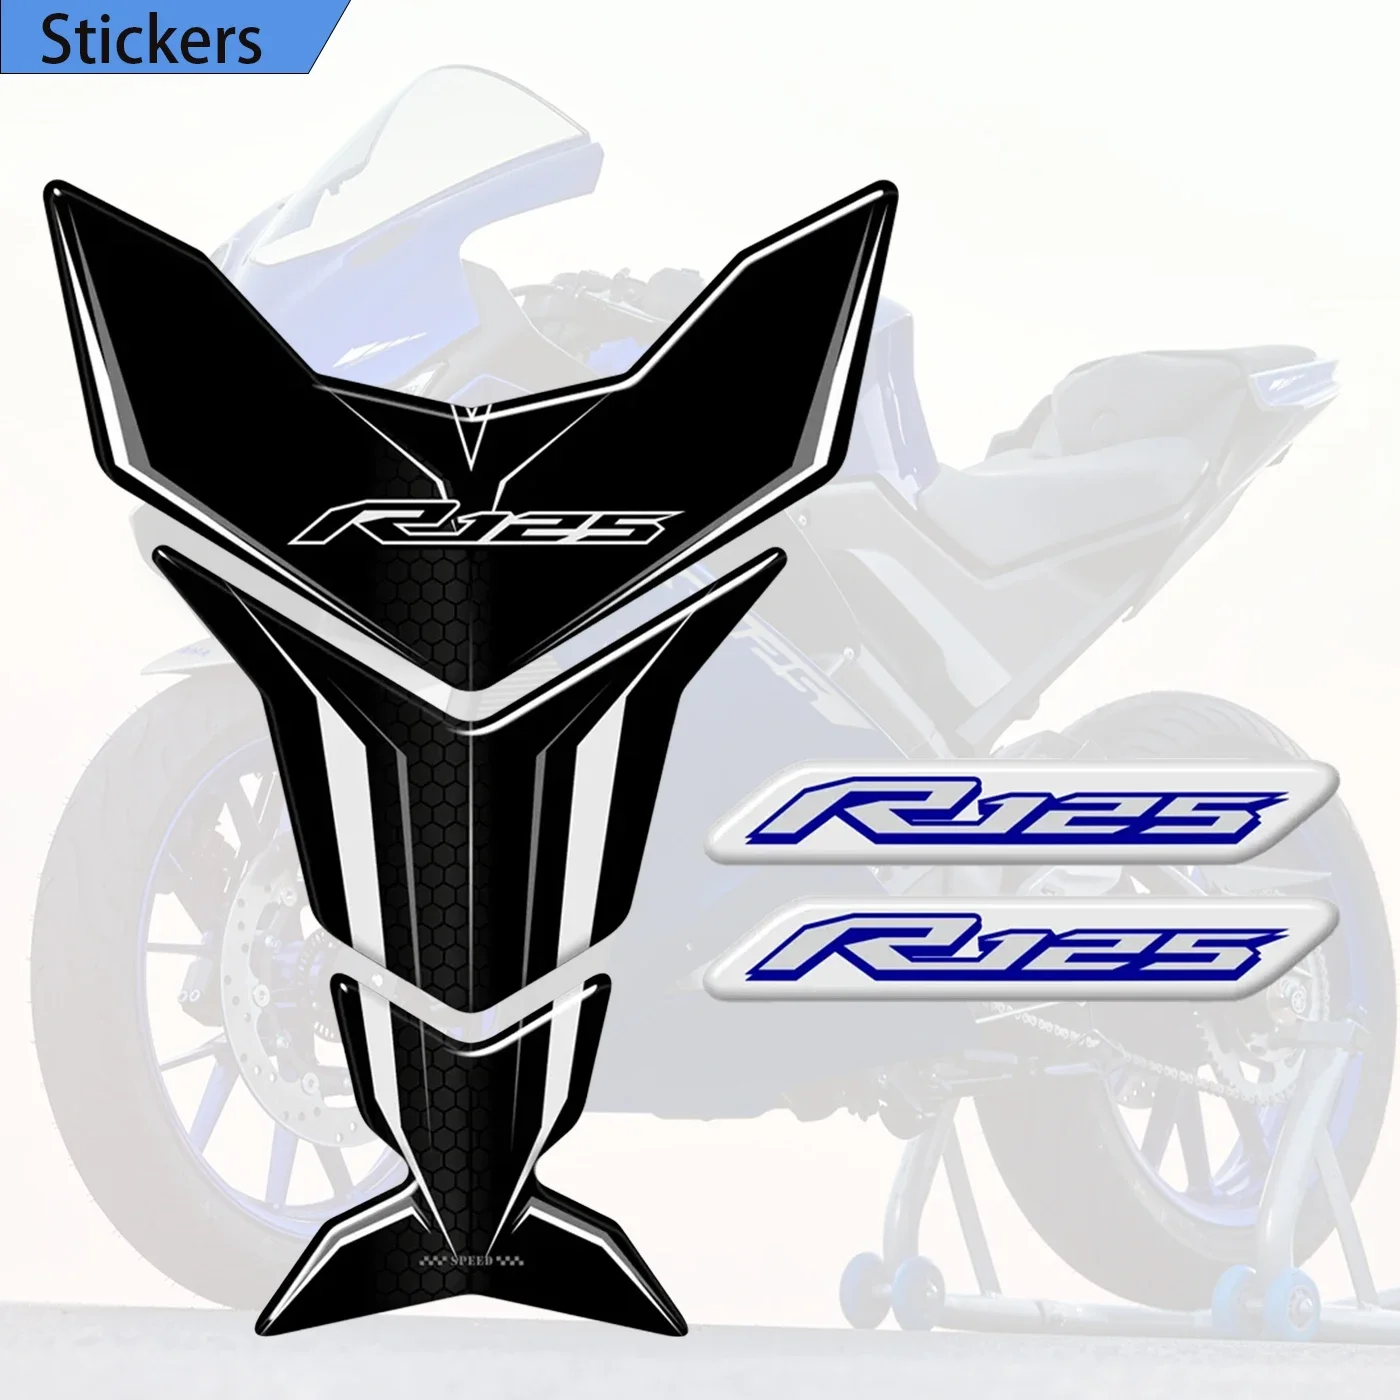 YZF R125 Fit Yamaha R 125  Tank Pad Protector decals Tank Pad Motorcycle 2014 2015 2016 2017 2019 2020